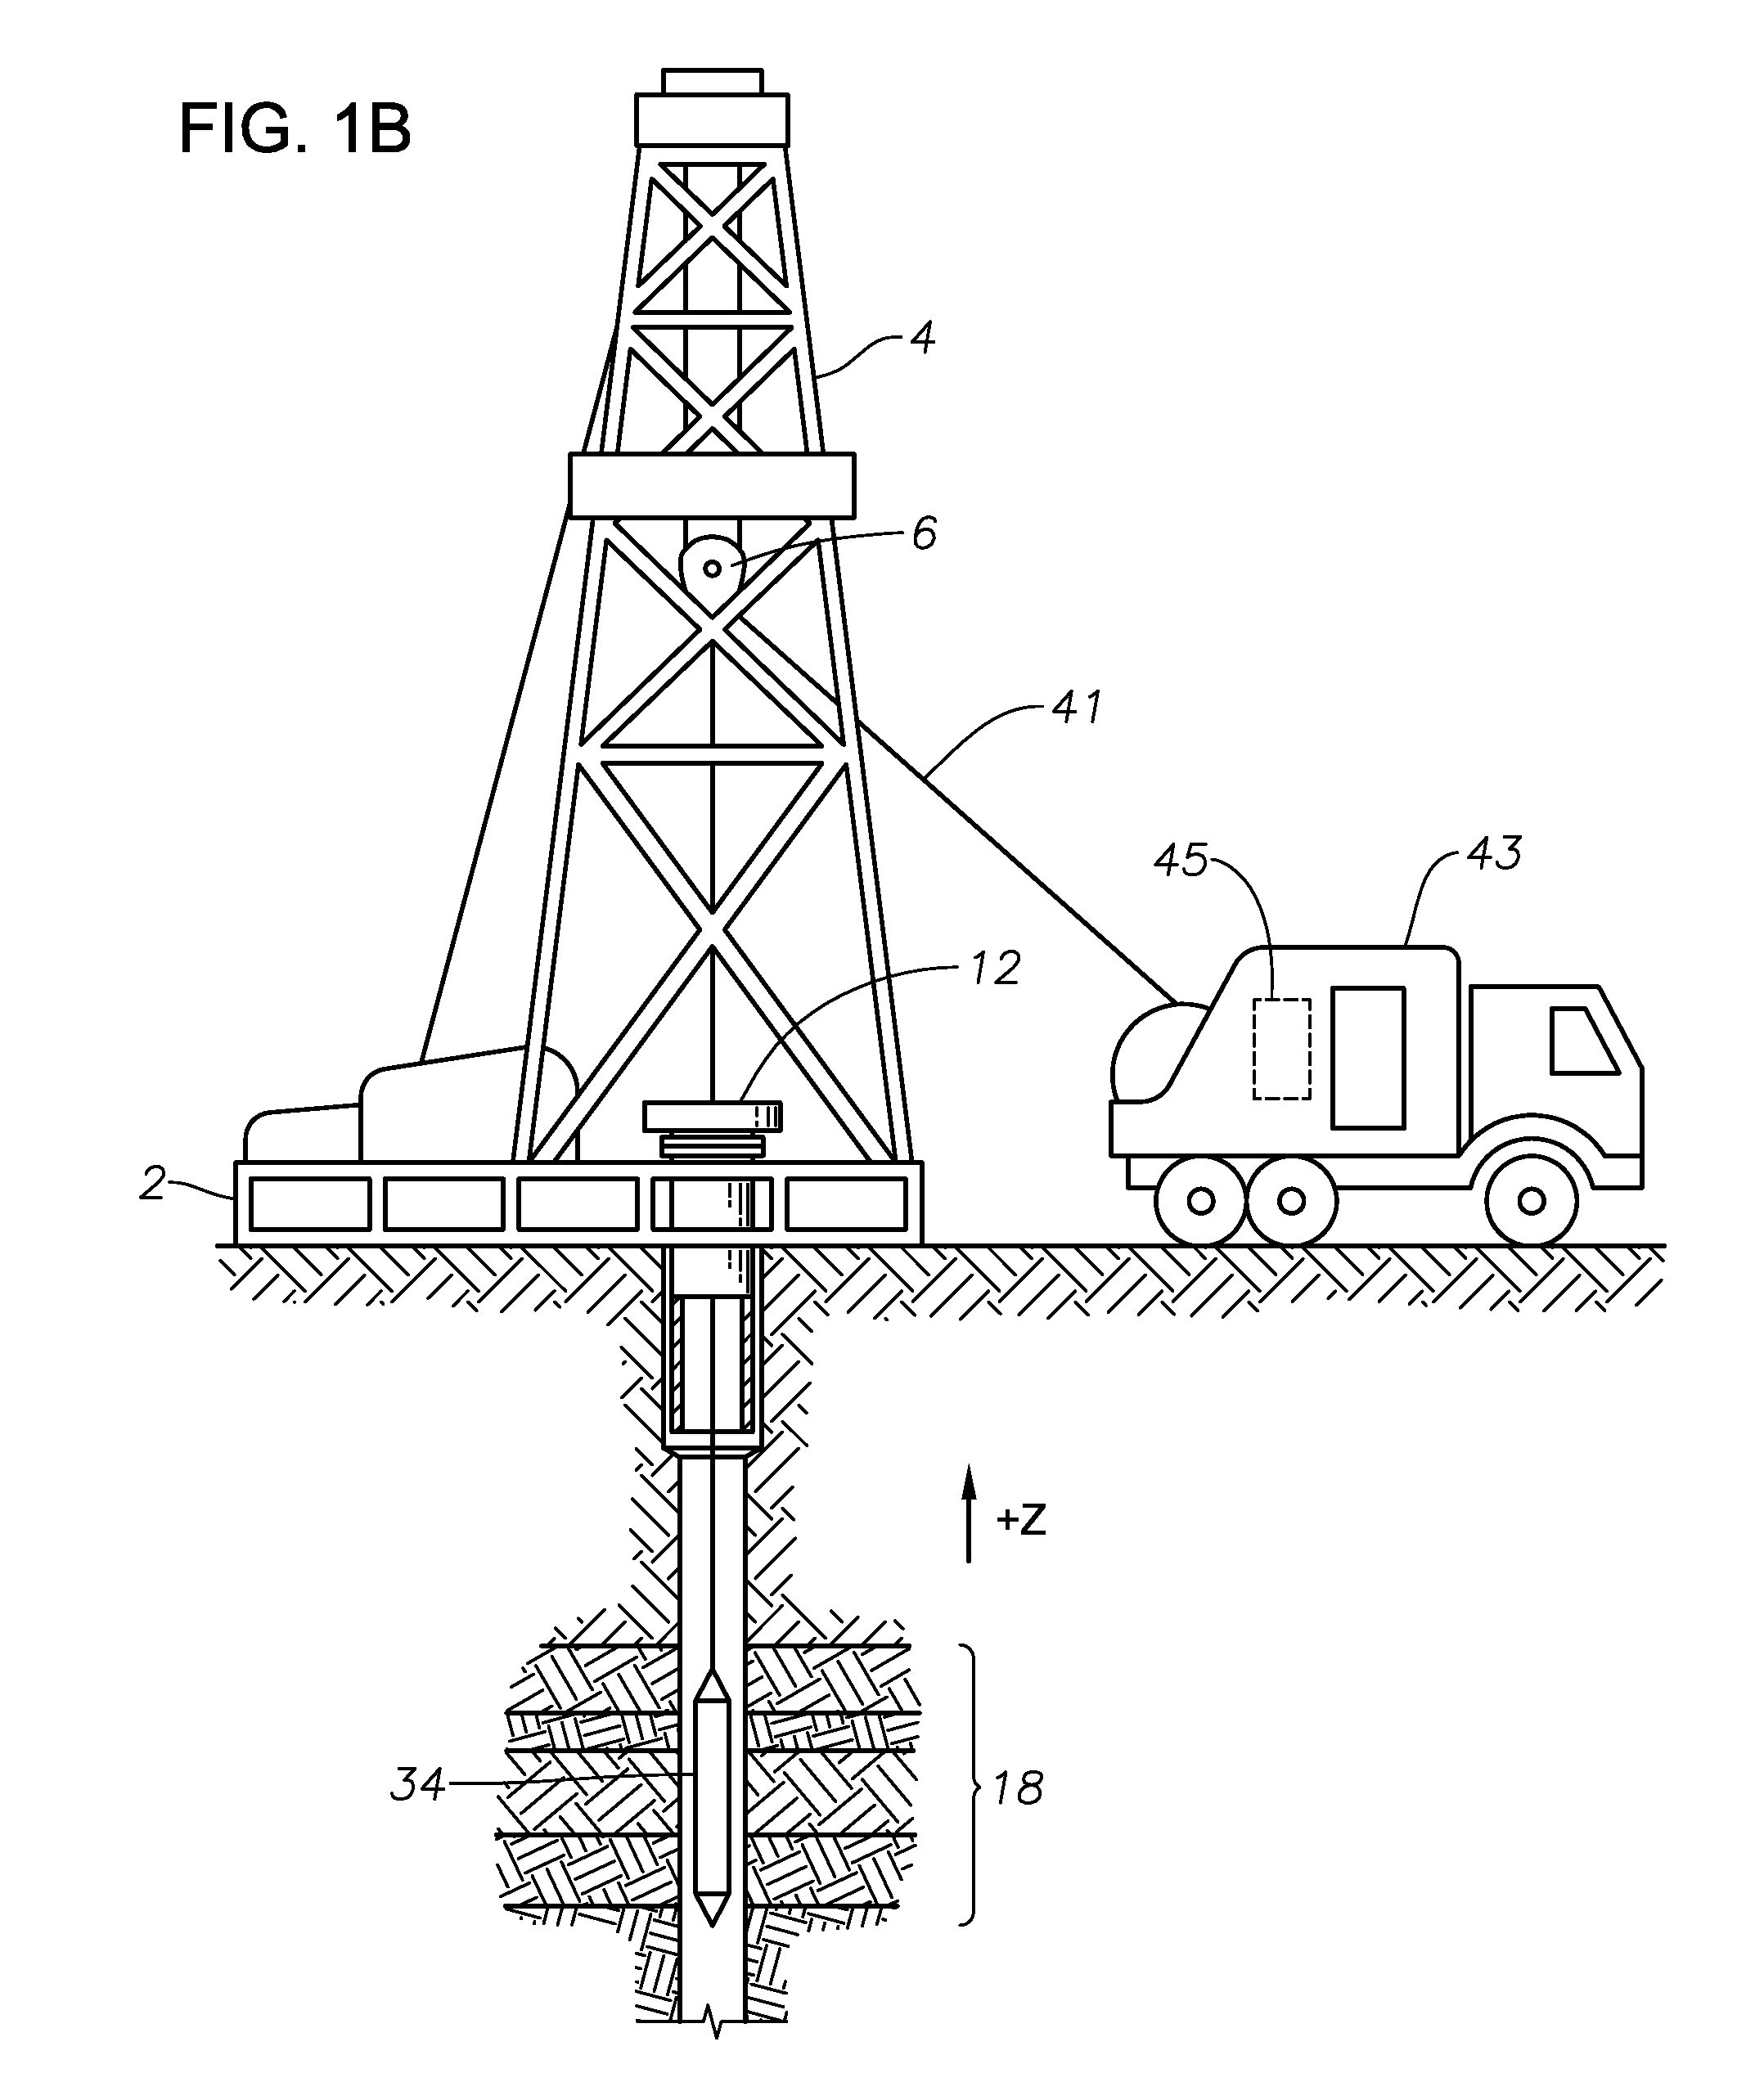 System, Method and Computer-Program Product for In-Situ Calibration of a Wellbore Resistivity Logging Tool